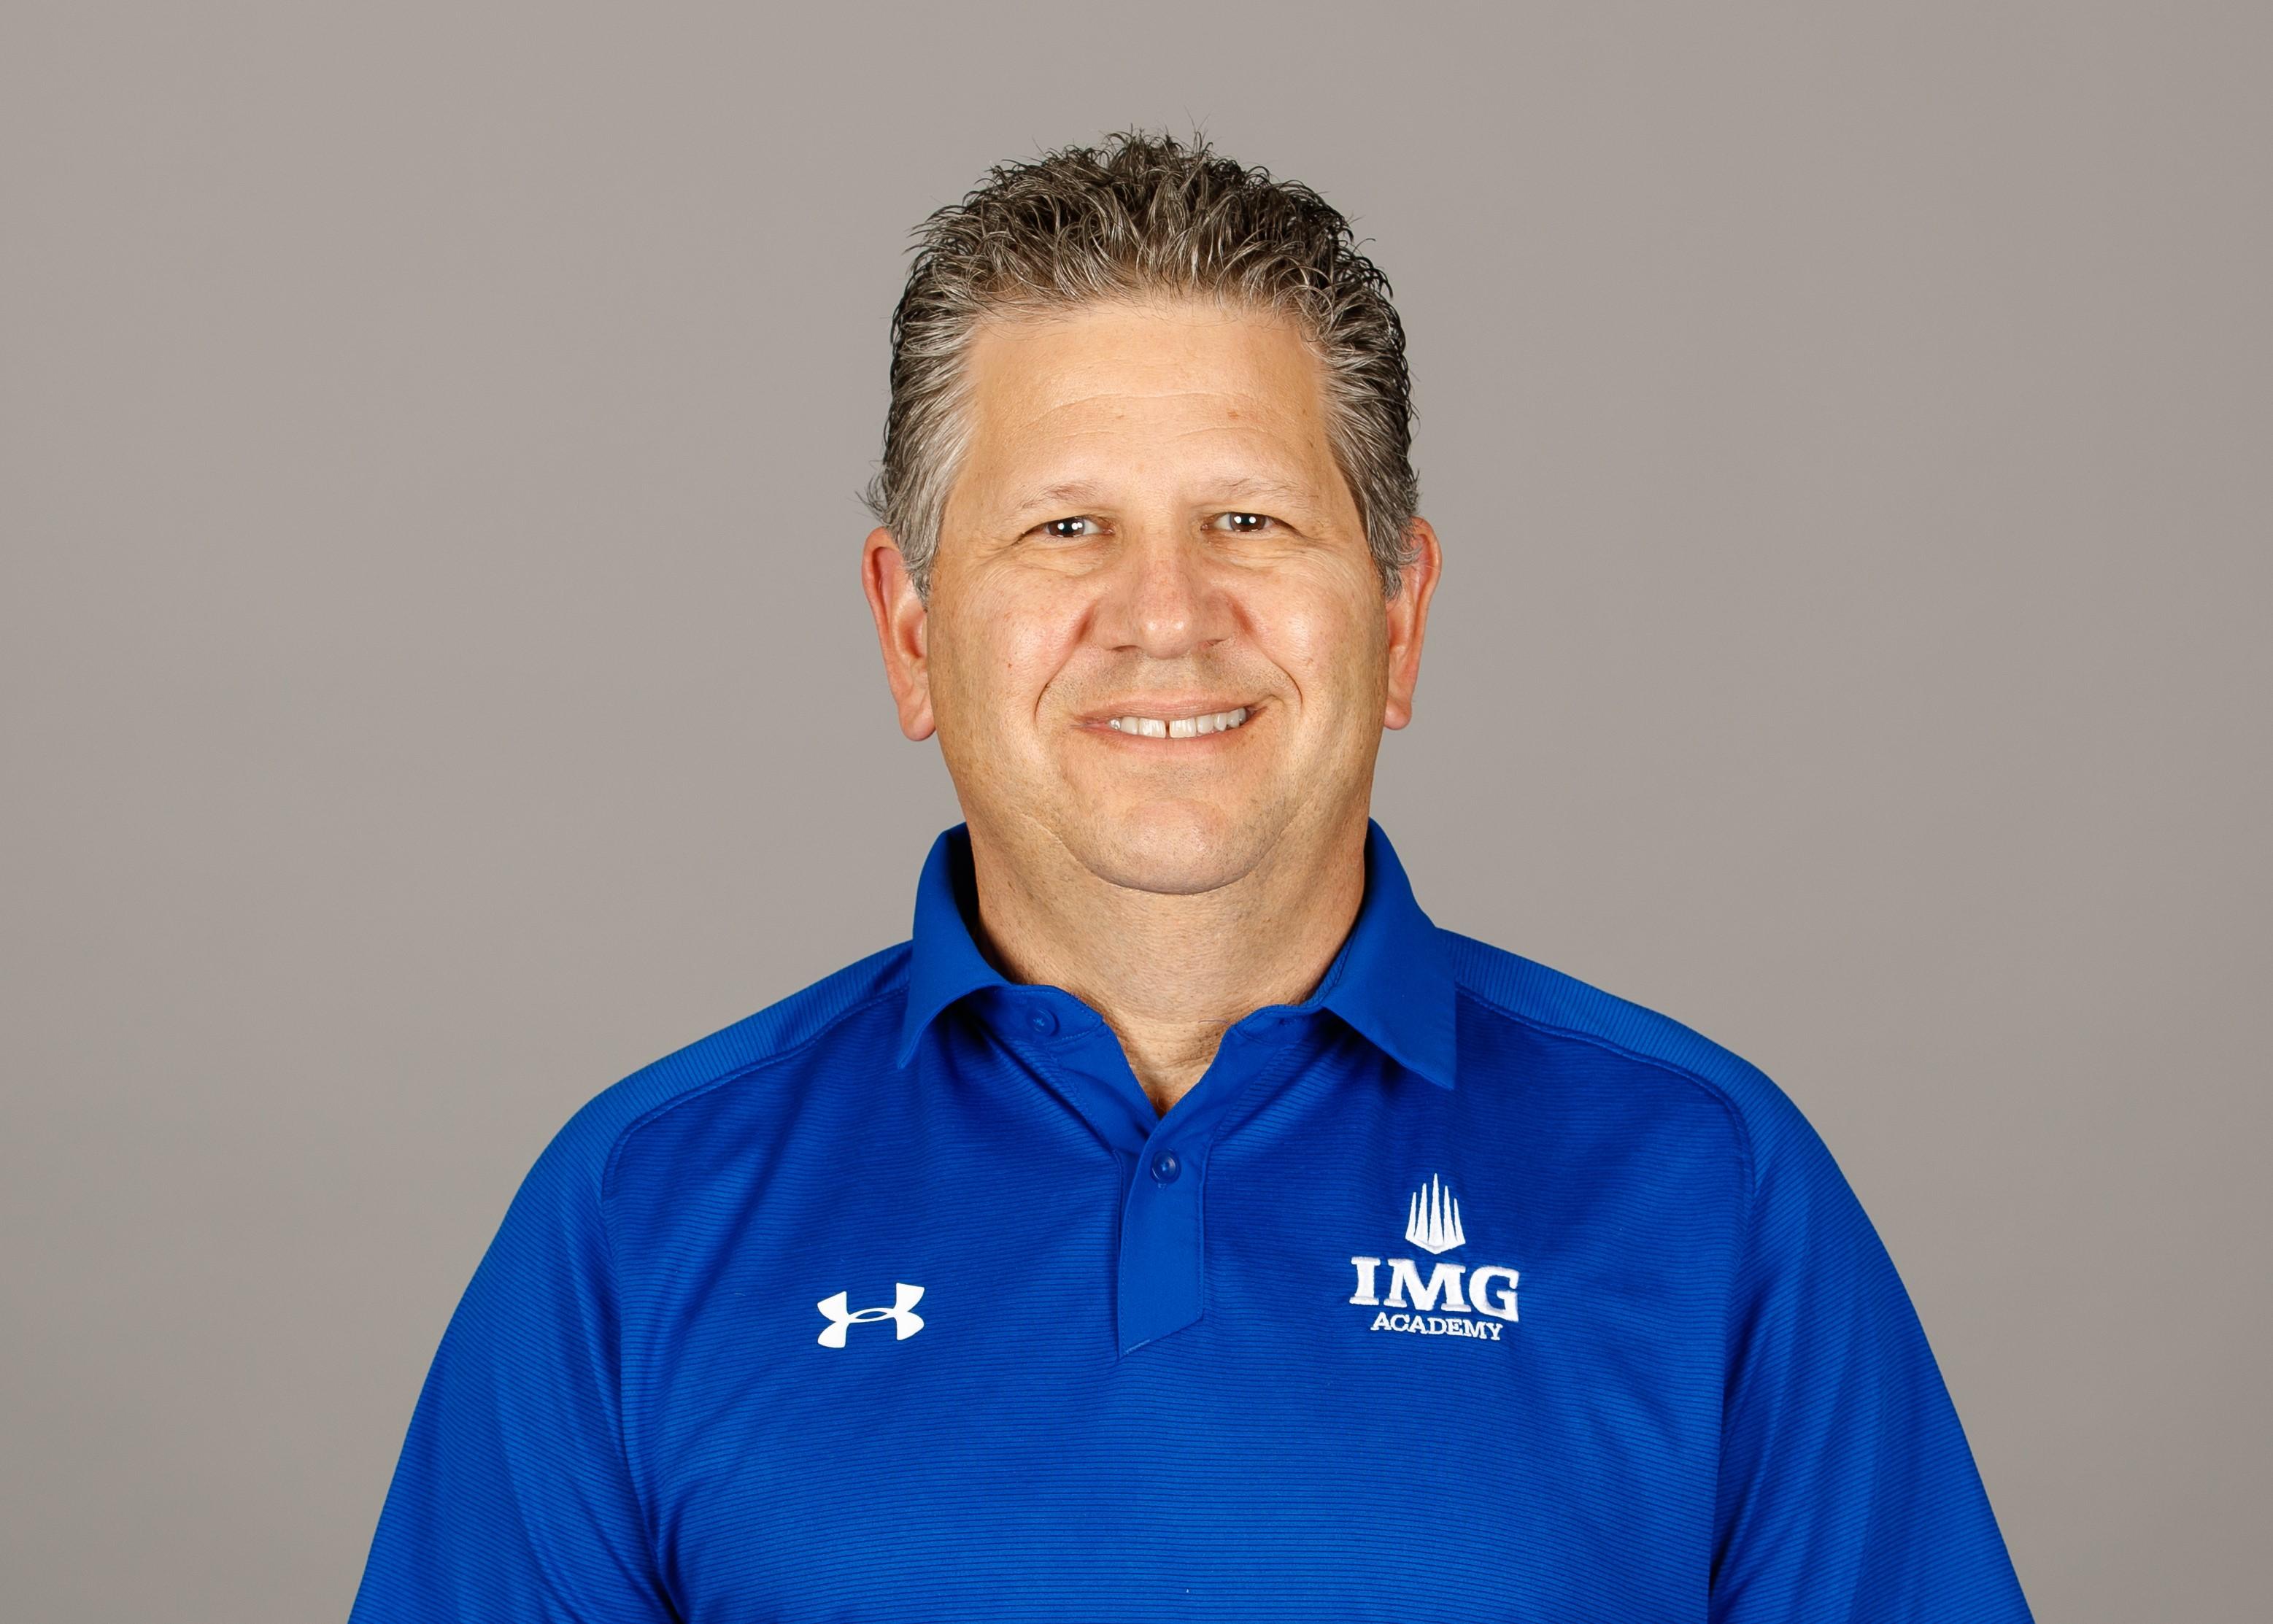 Jamie Speronis, Director of Football for IMG Academy